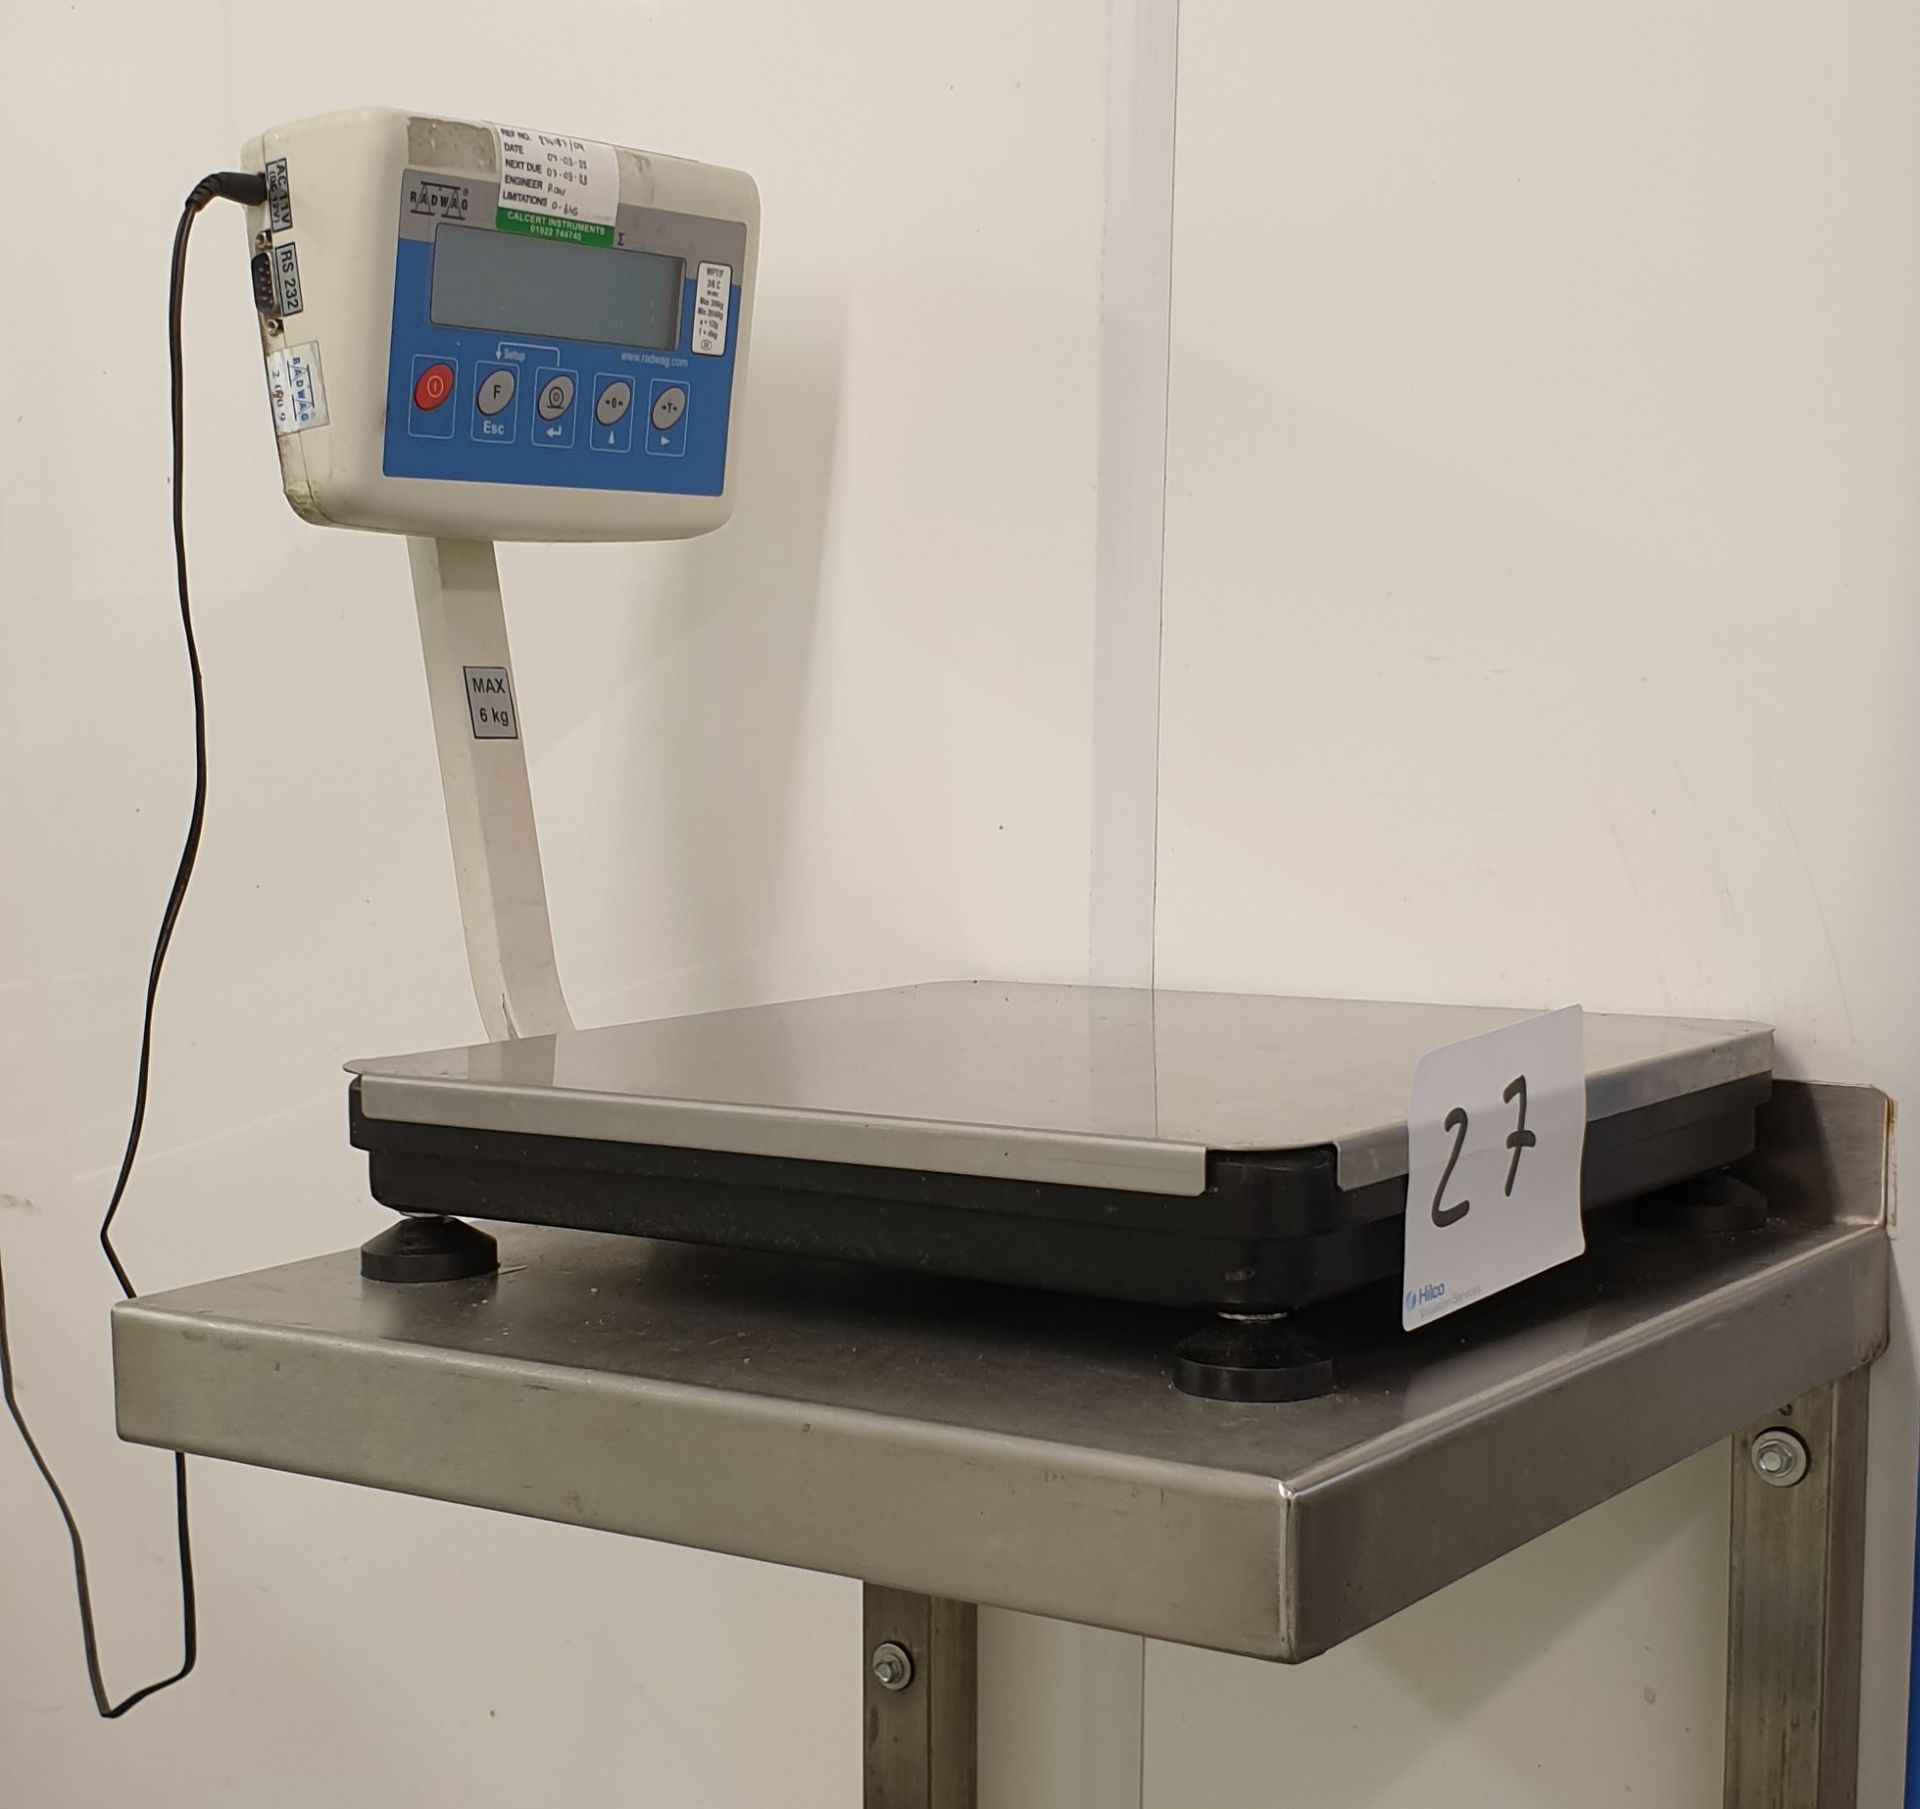 Radwag RS232 Scales, 6kg Max (2009) - Image 3 of 3